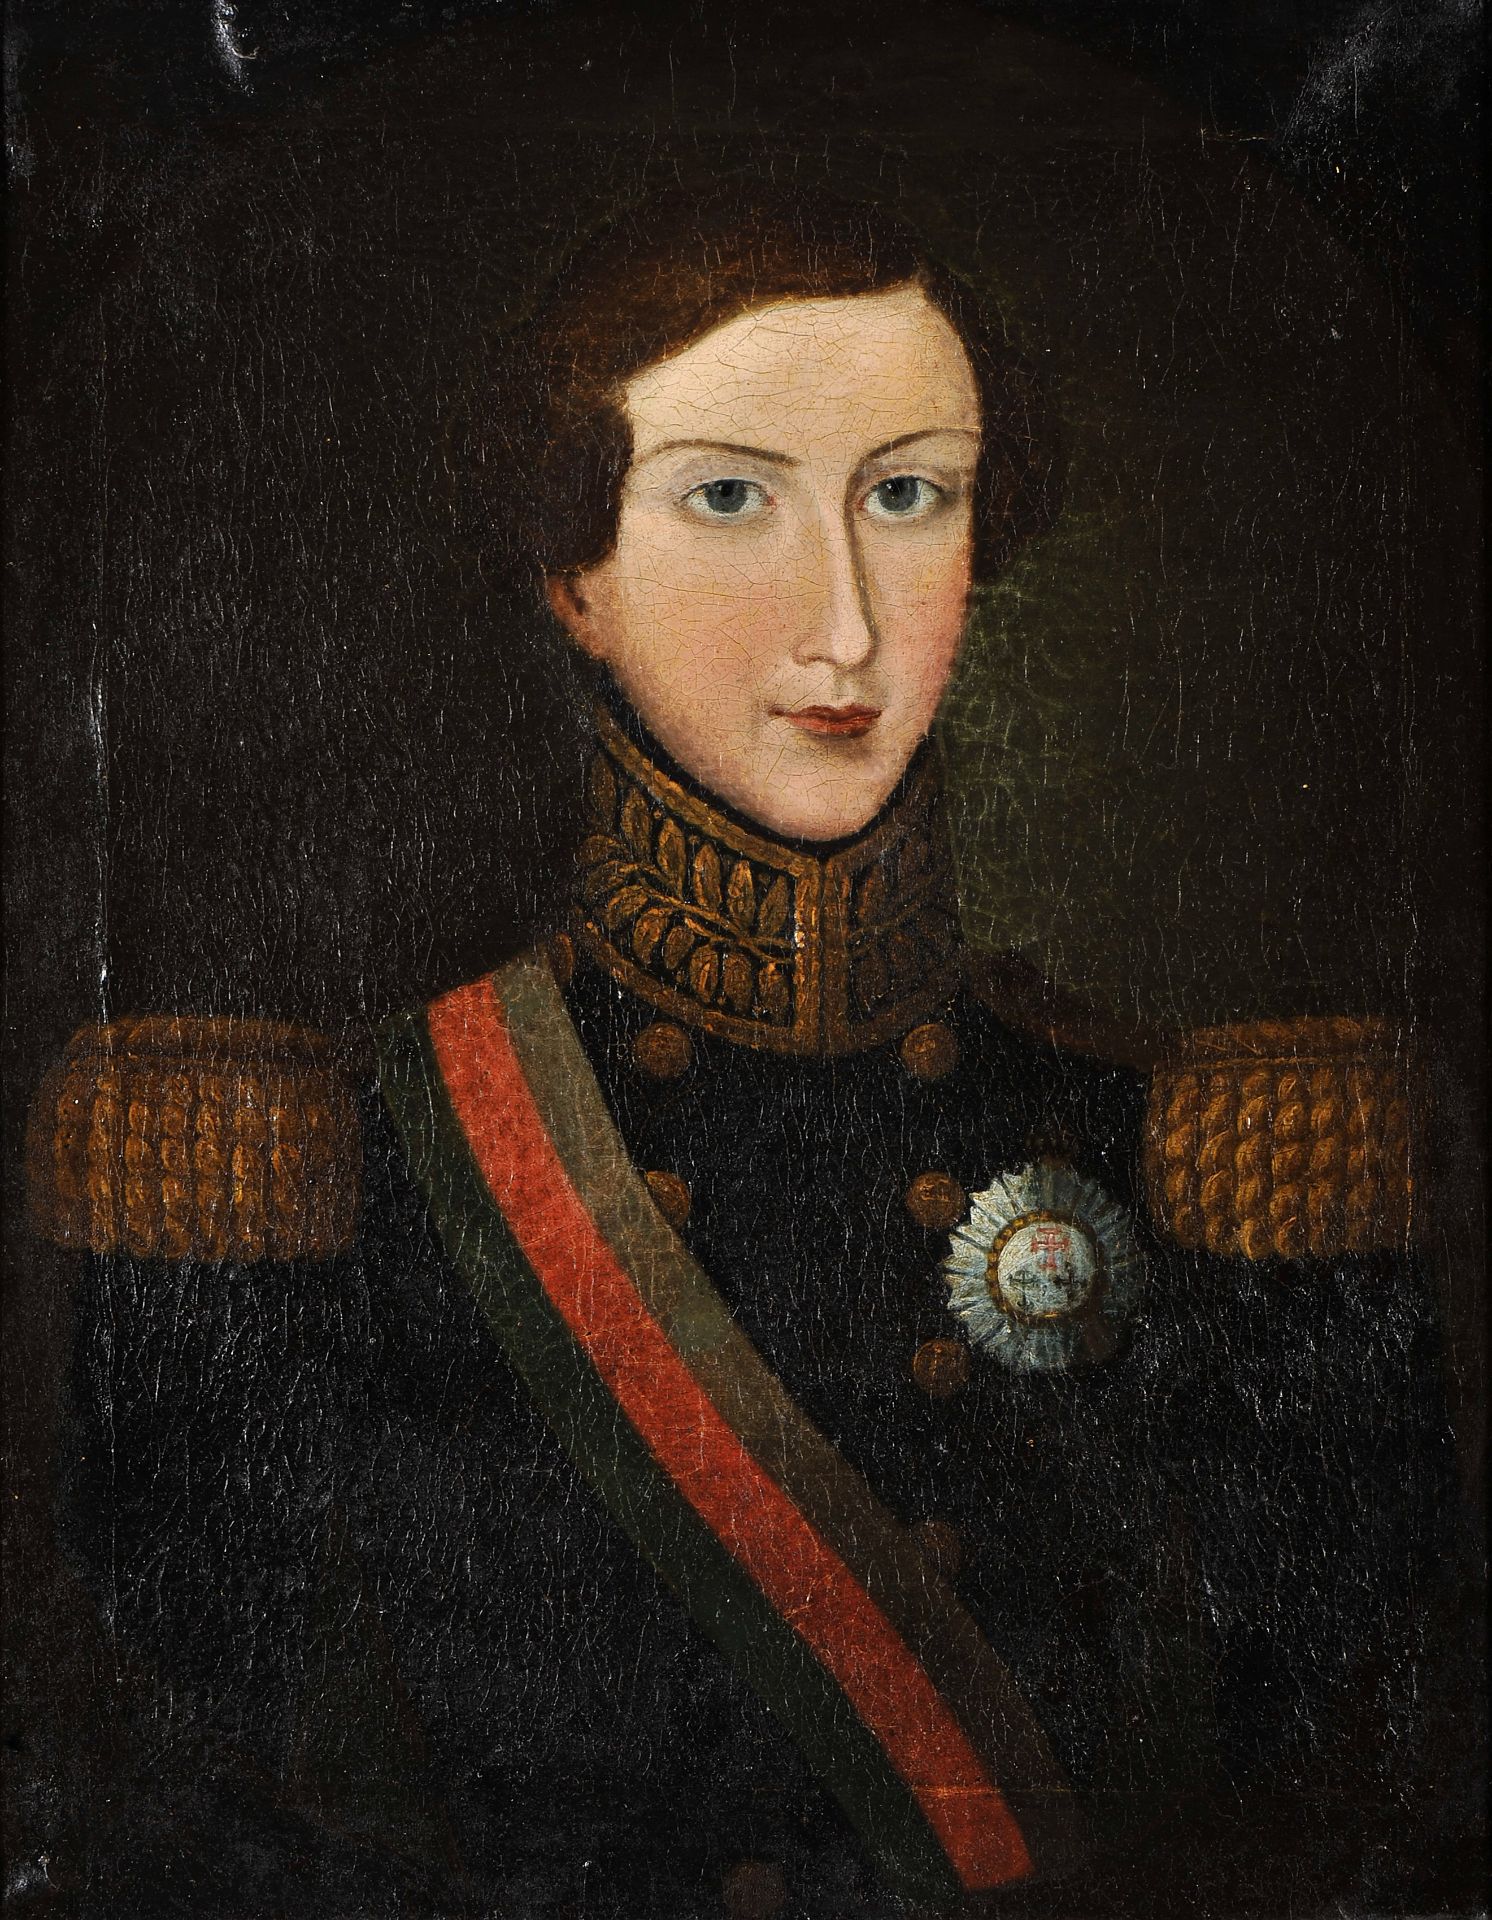 Portrait of King D. Miguel I (1802-1866) of Portugal - Image 2 of 2